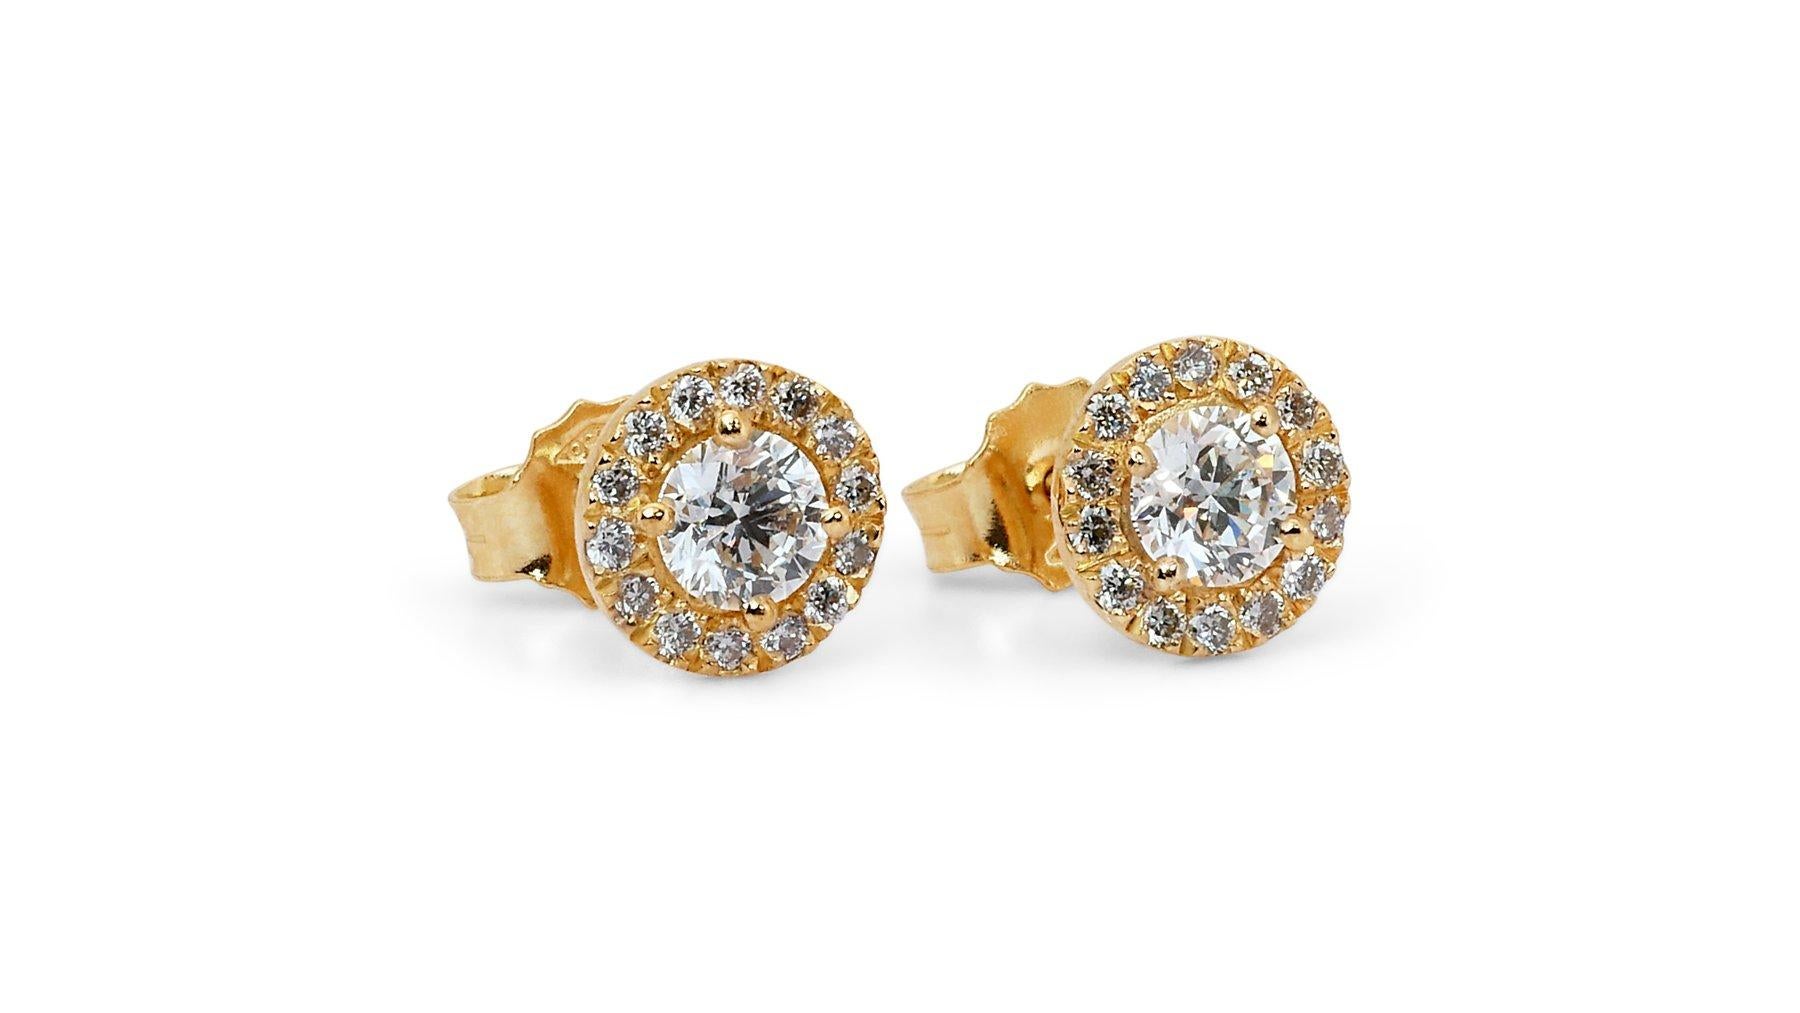 Luxurious 18 kt. Gold Earrings with 2.24 ct Natural Diamond - GIA Certificate For Sale 3